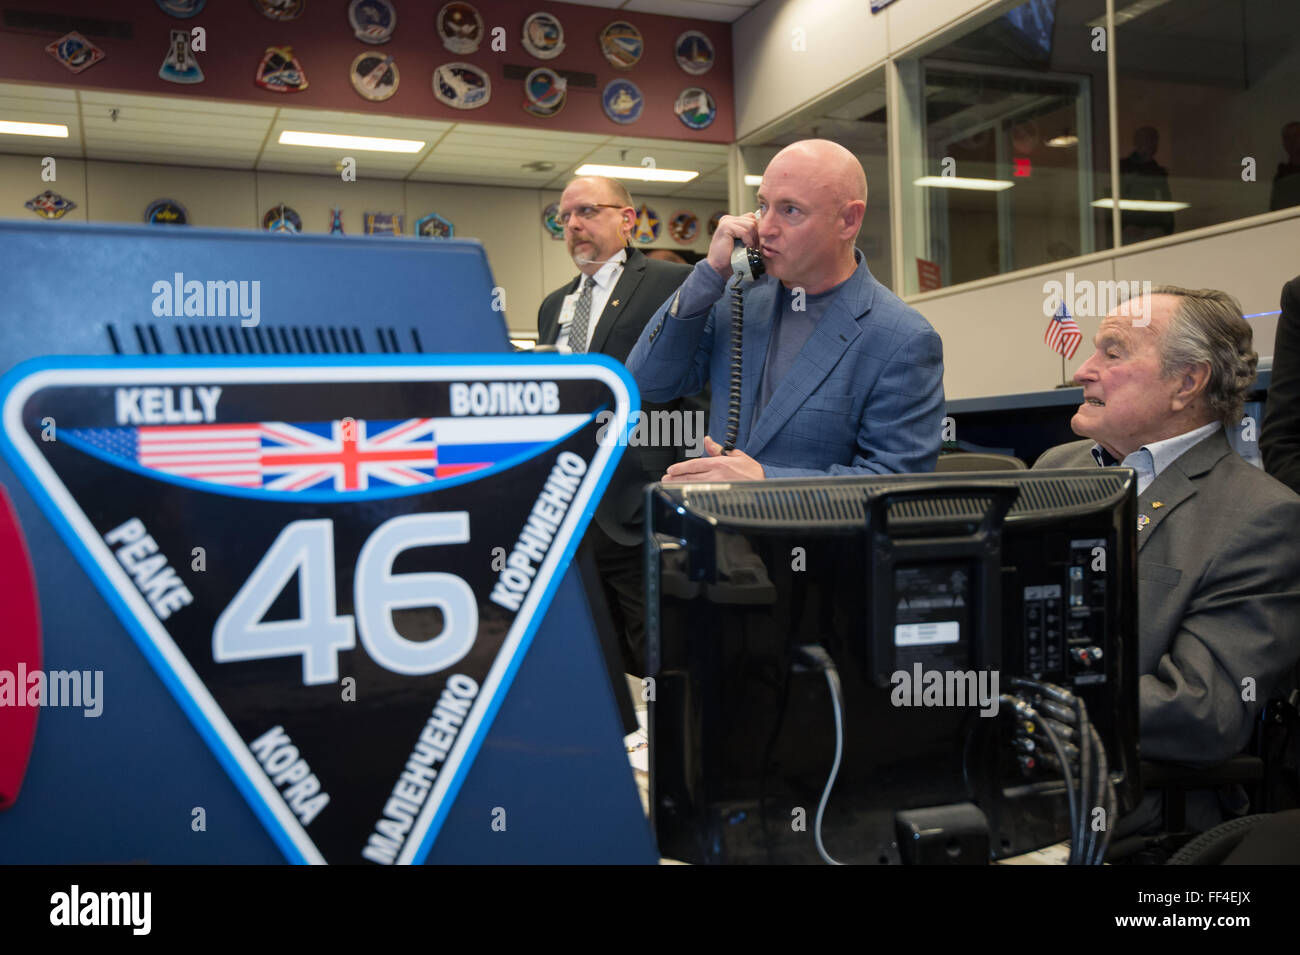 Former President George H.W. Bush, right, with former astronaut Mark Kelly as they speak with twin brother Expedition 46 Commander Scott Kelly and Flight Engineer Tim Kopra currently on the International Space Station from the Flight Control Room during a visit to the Johnson Space Center February 5, 2016 in Houston, Texas. Stock Photo